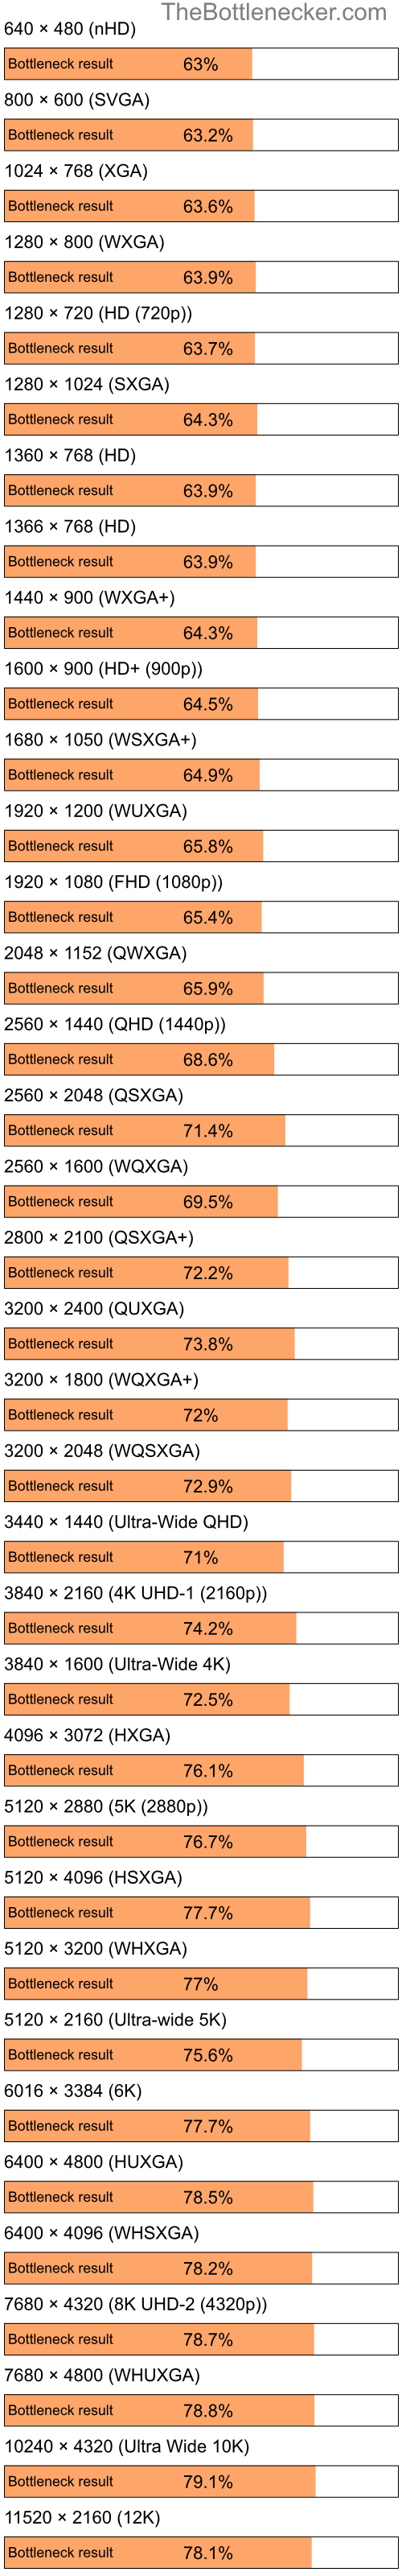 Bottleneck results by resolution for Intel Celeron M and NVIDIA Quadro NVS 295 in General Tasks